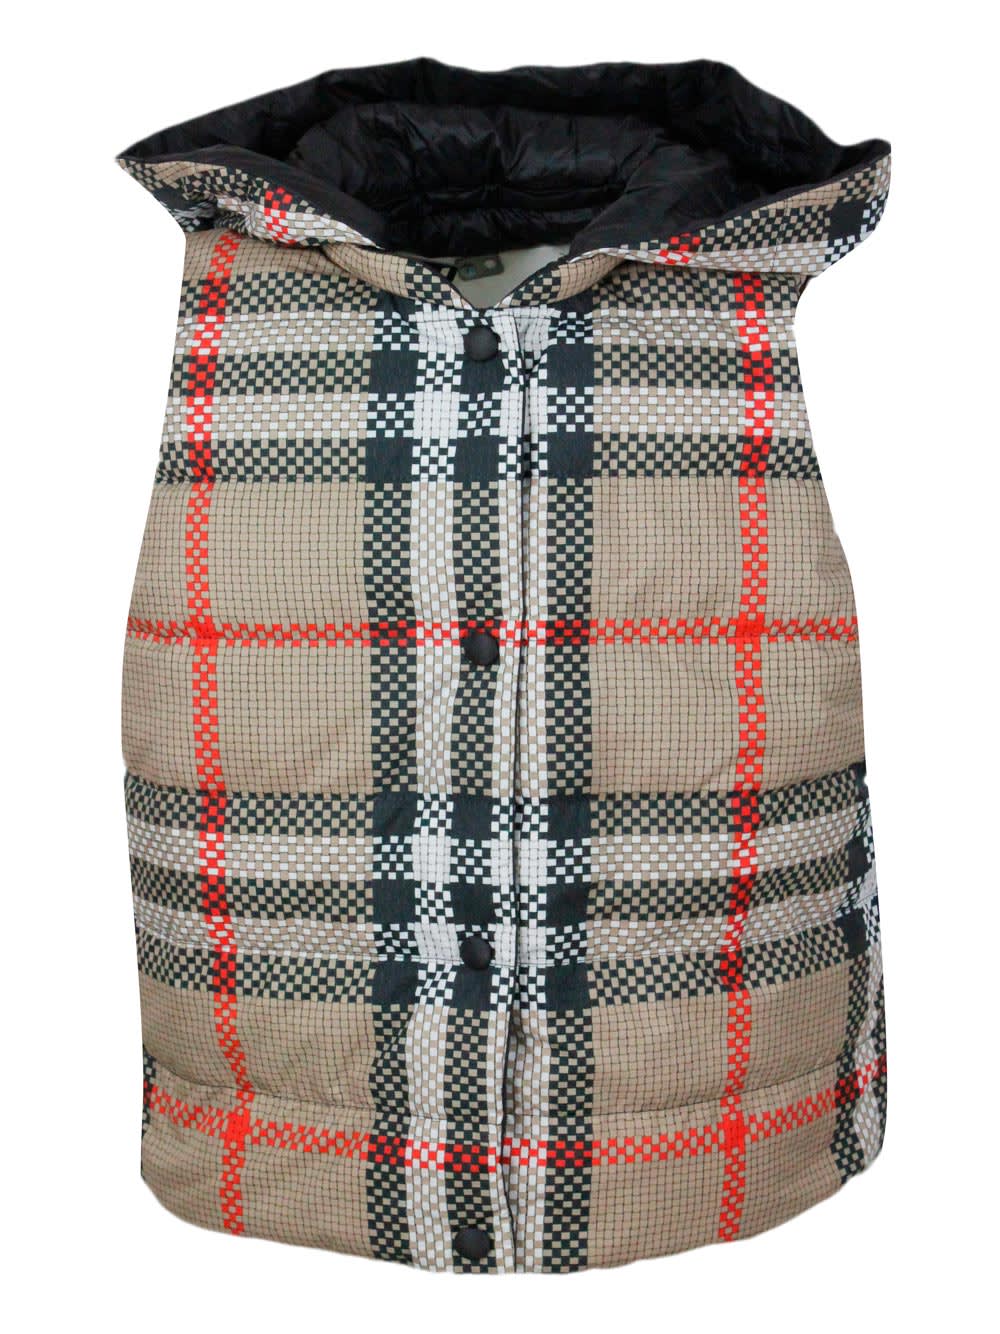 Sleeveless Gilet Padded With Real Natural Down, Closure With Burberry New Check Buttons